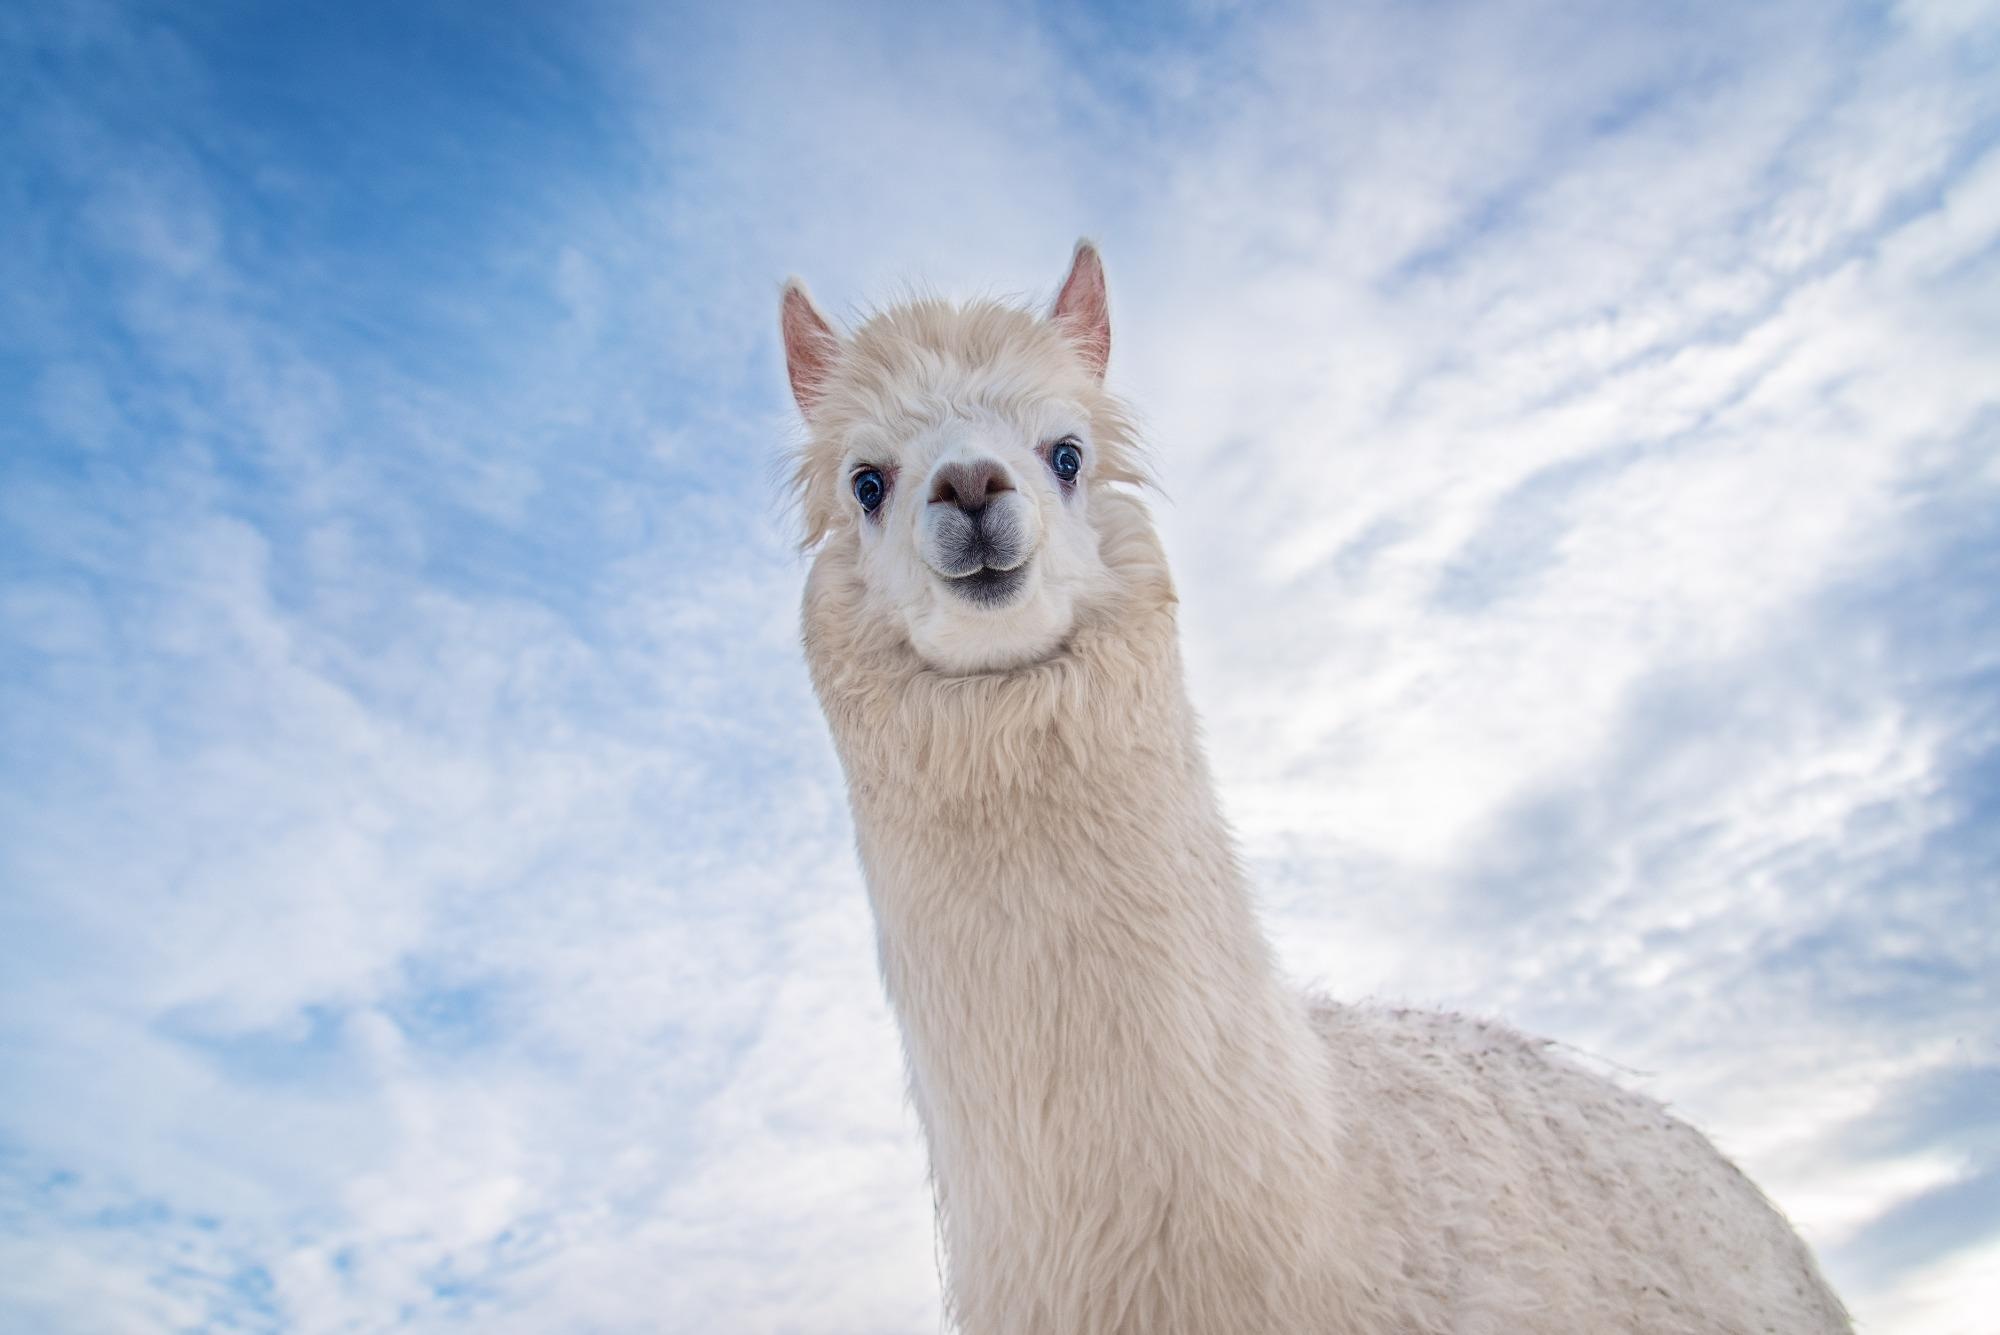 Study: Beta interferons from the extant camelids: Unique among eutherian mammals. Image Credit: Rita_Kochmarjova / Shutterstock